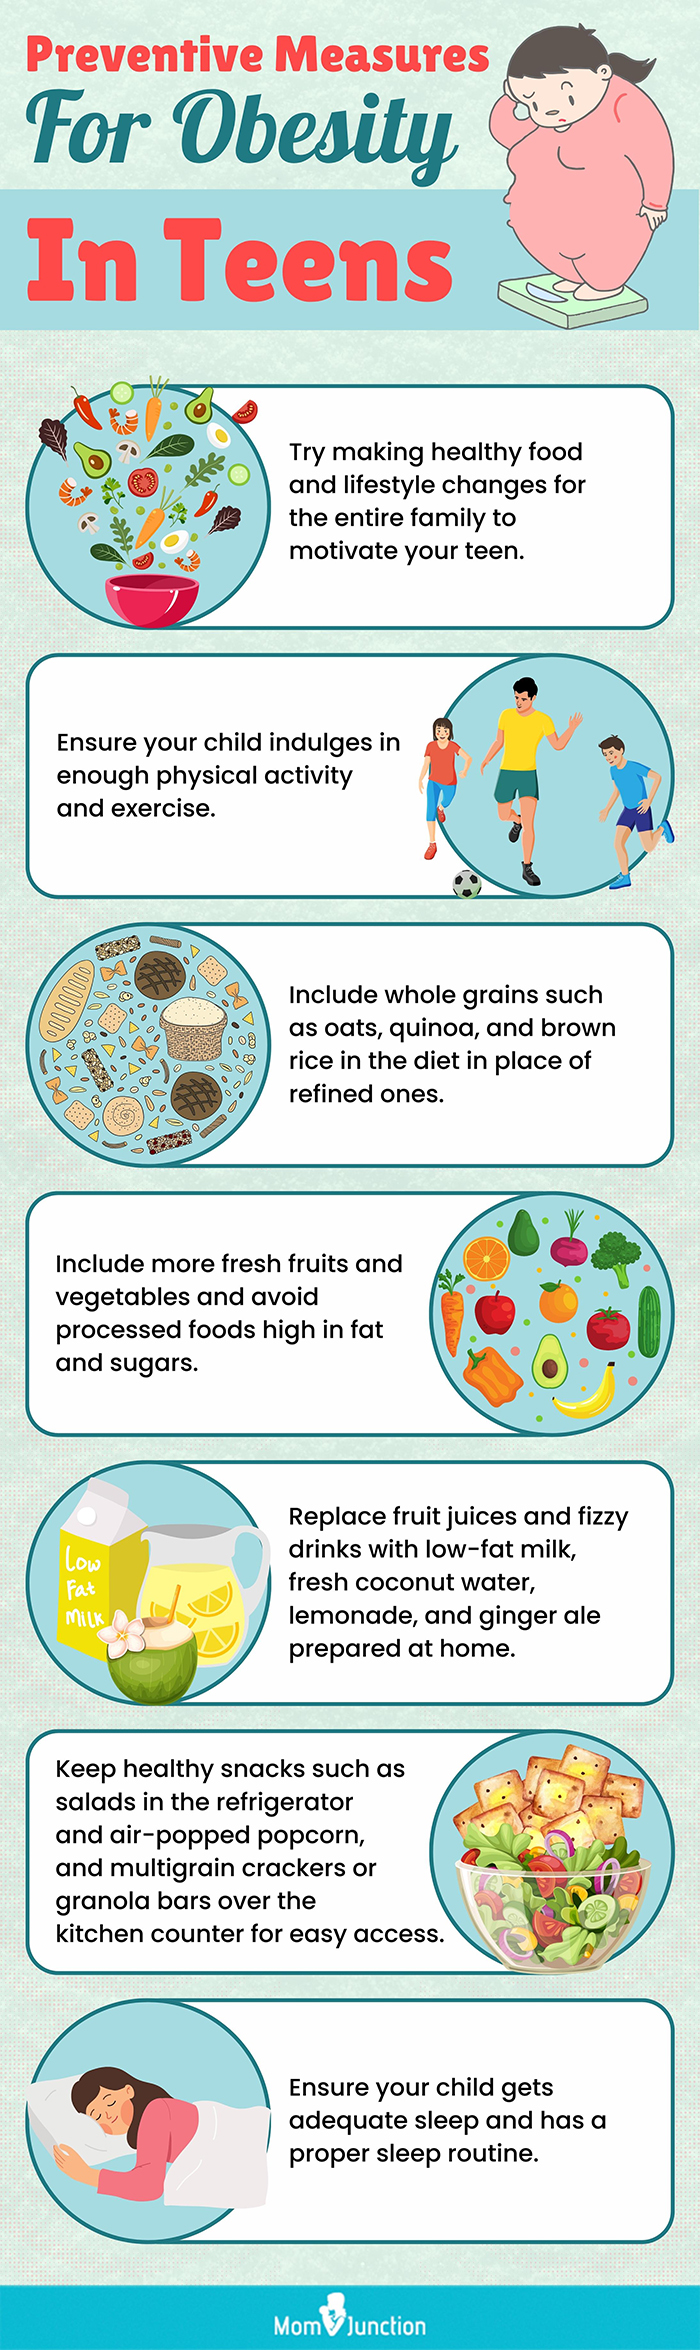 preventive measures for obesity in teens (infographic)